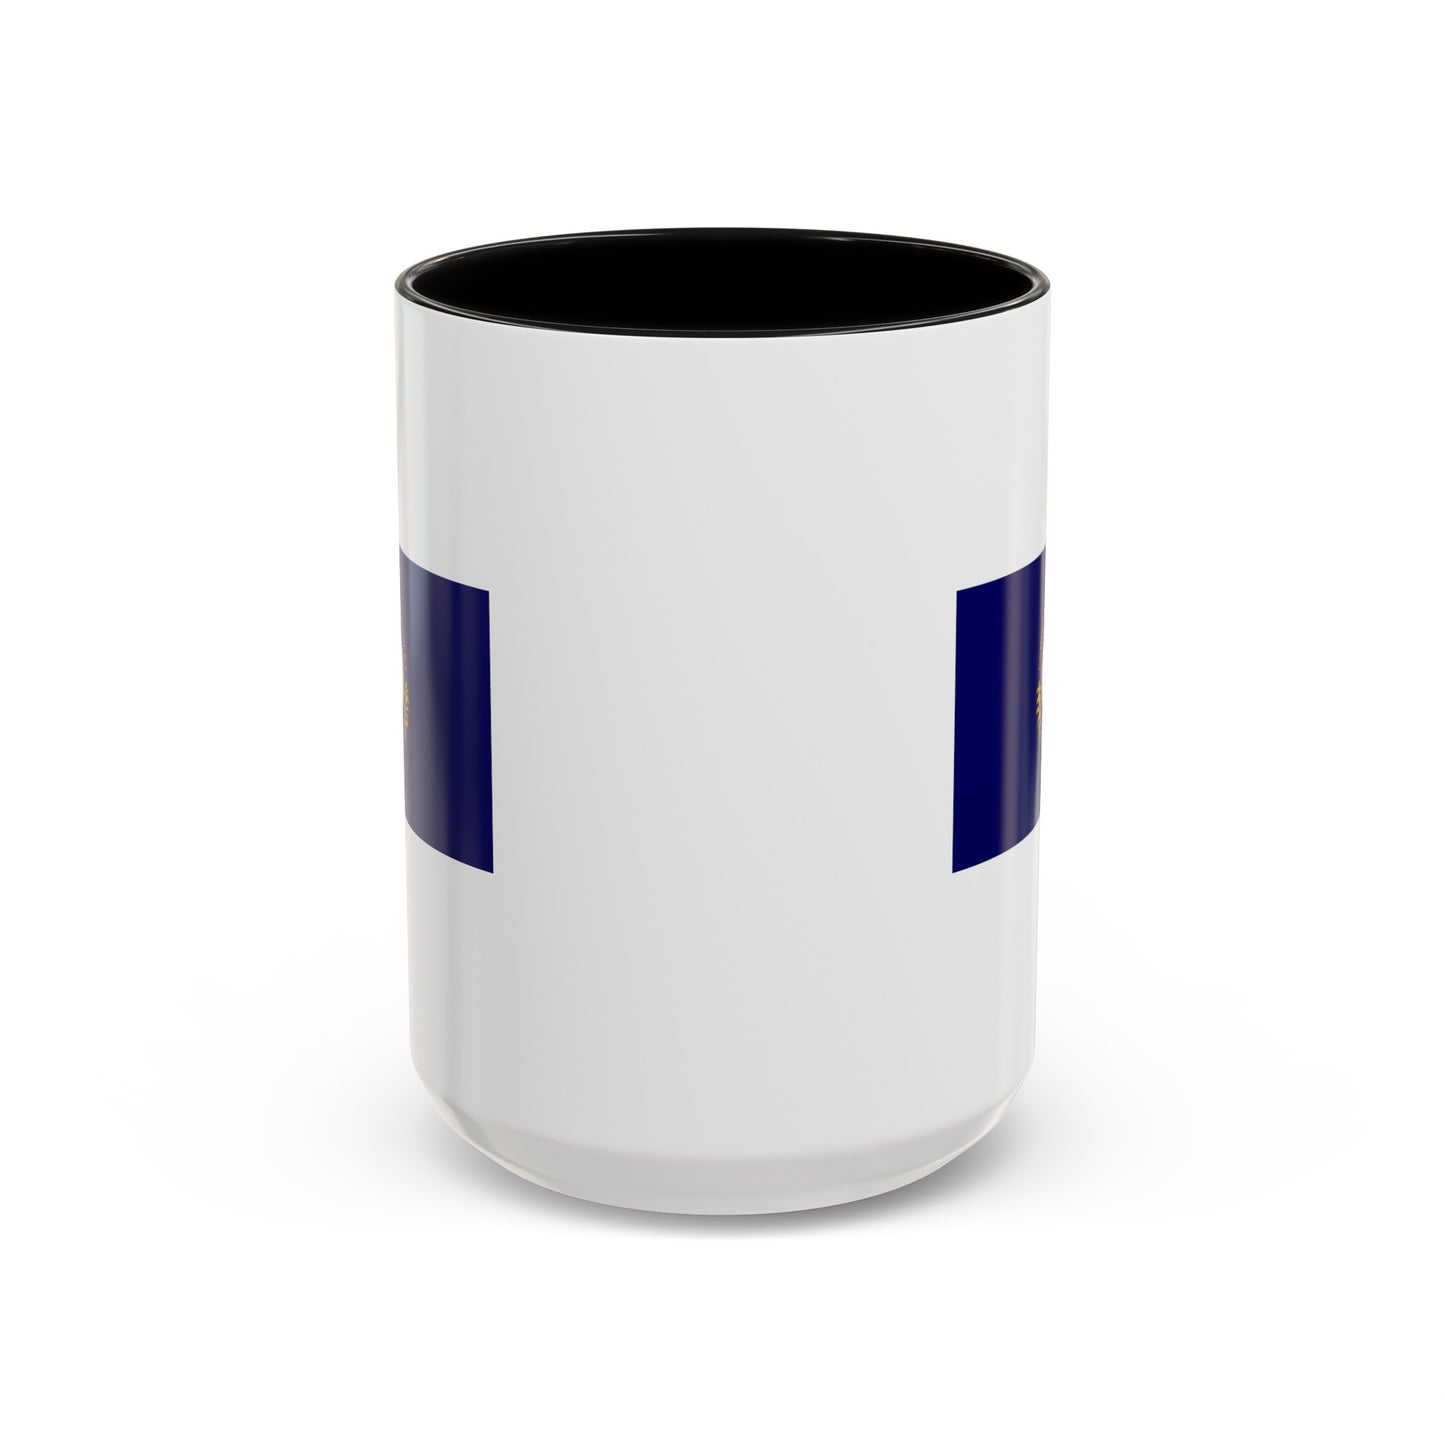 Commonwealth of Kentucky State Flag - Double Sided Black Accent White Ceramic Coffee Mug 15oz by TheGlassyLass.com